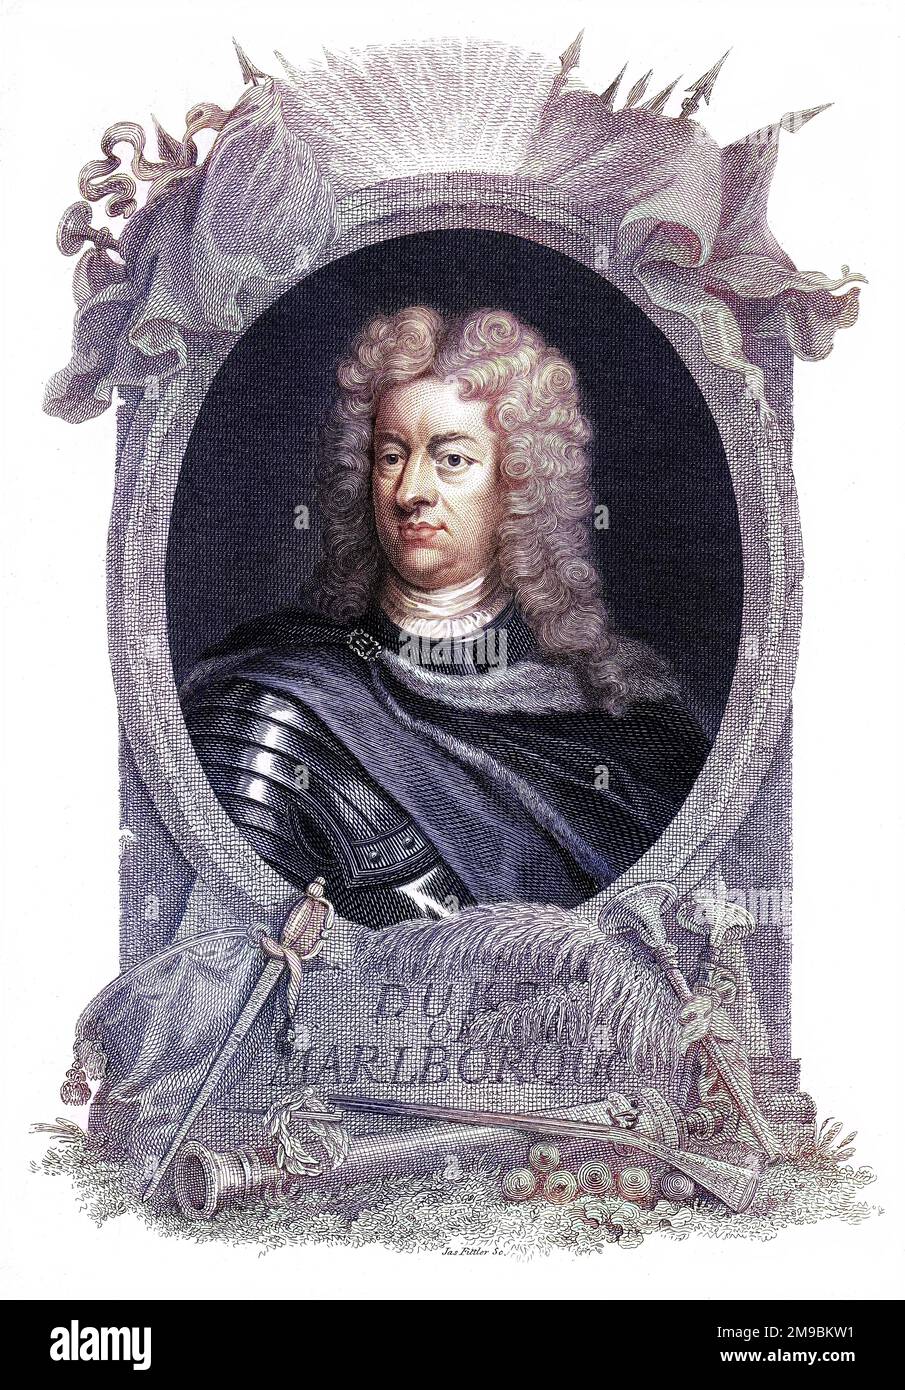 JOHN CHURCHILL first duke of MARLBOROUGH British military commander during the war of the Spanish Succession, owner of Blenheim Palace. Stock Photo